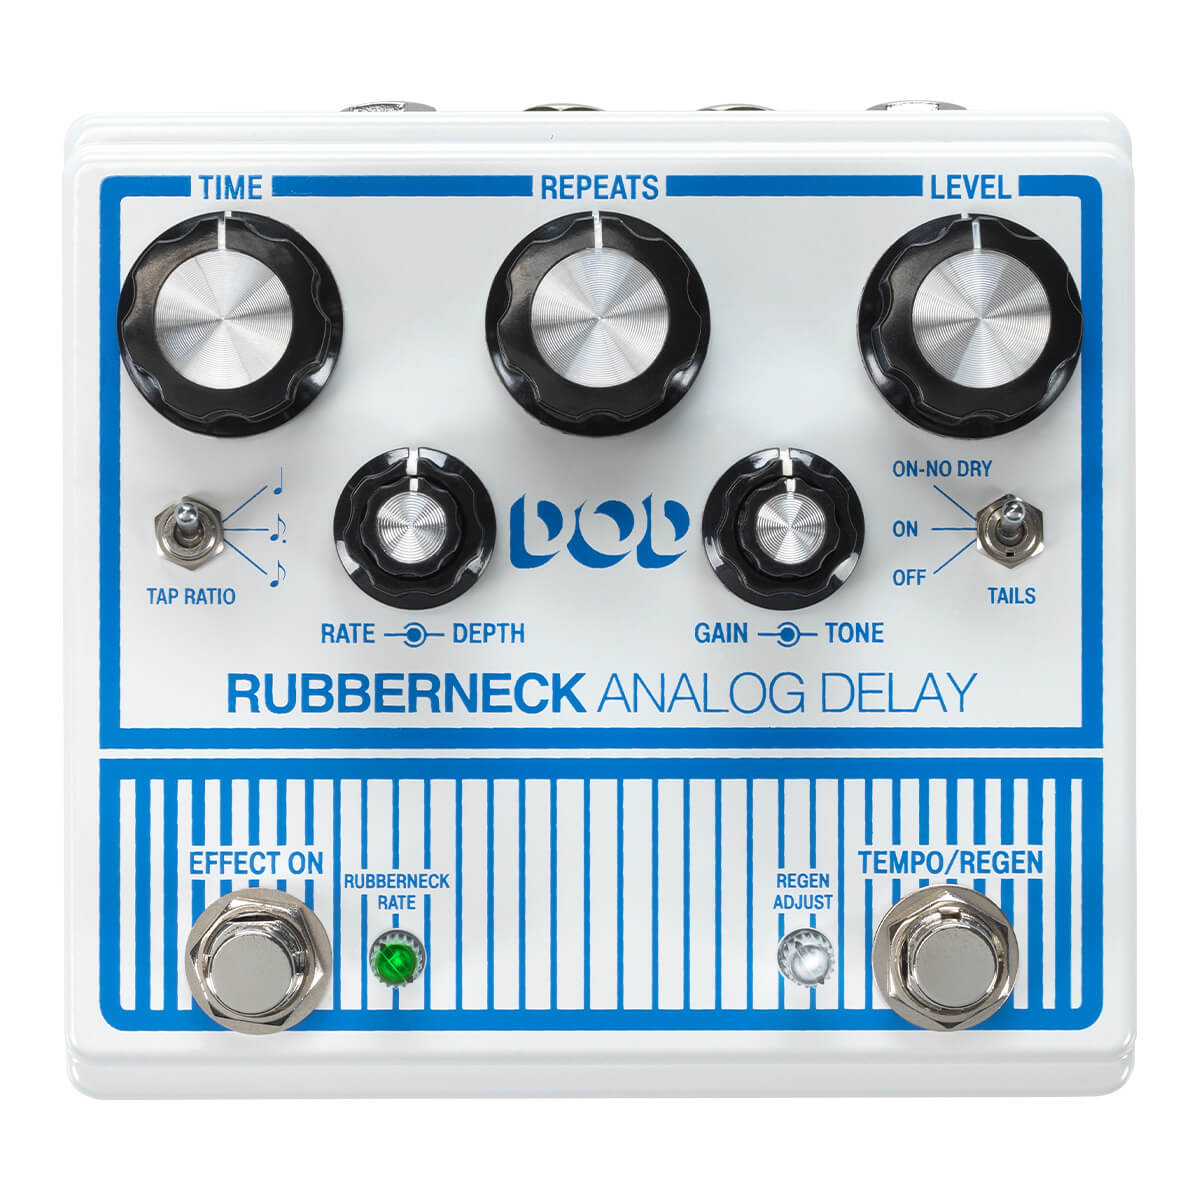 DOD Rubberneck analog delay guitar pedal in white with blue graphics, Front view